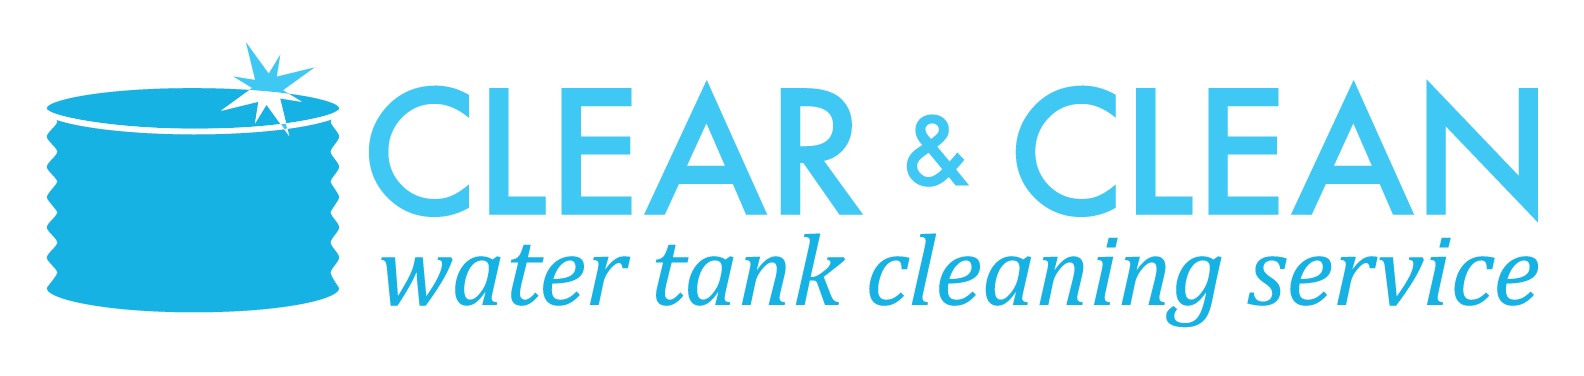 Welcome to Clear & Clean Water Tank Cleaning Services in Singleton